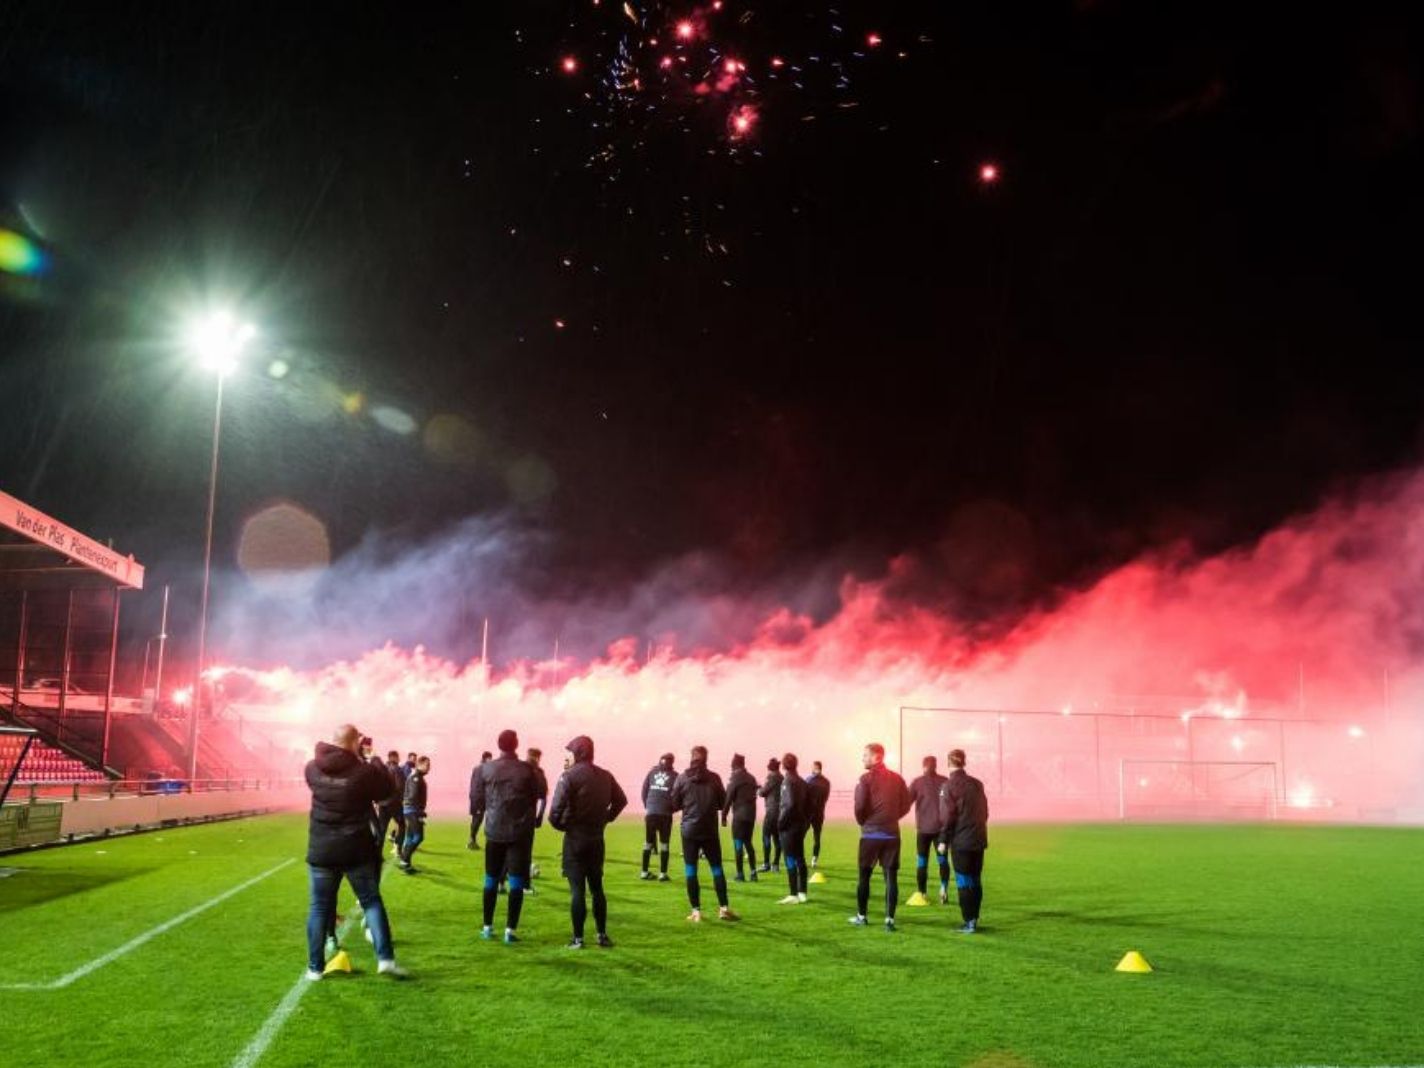 Dutch fans detonate pyro during 5 am training session, prove football fans are crazy